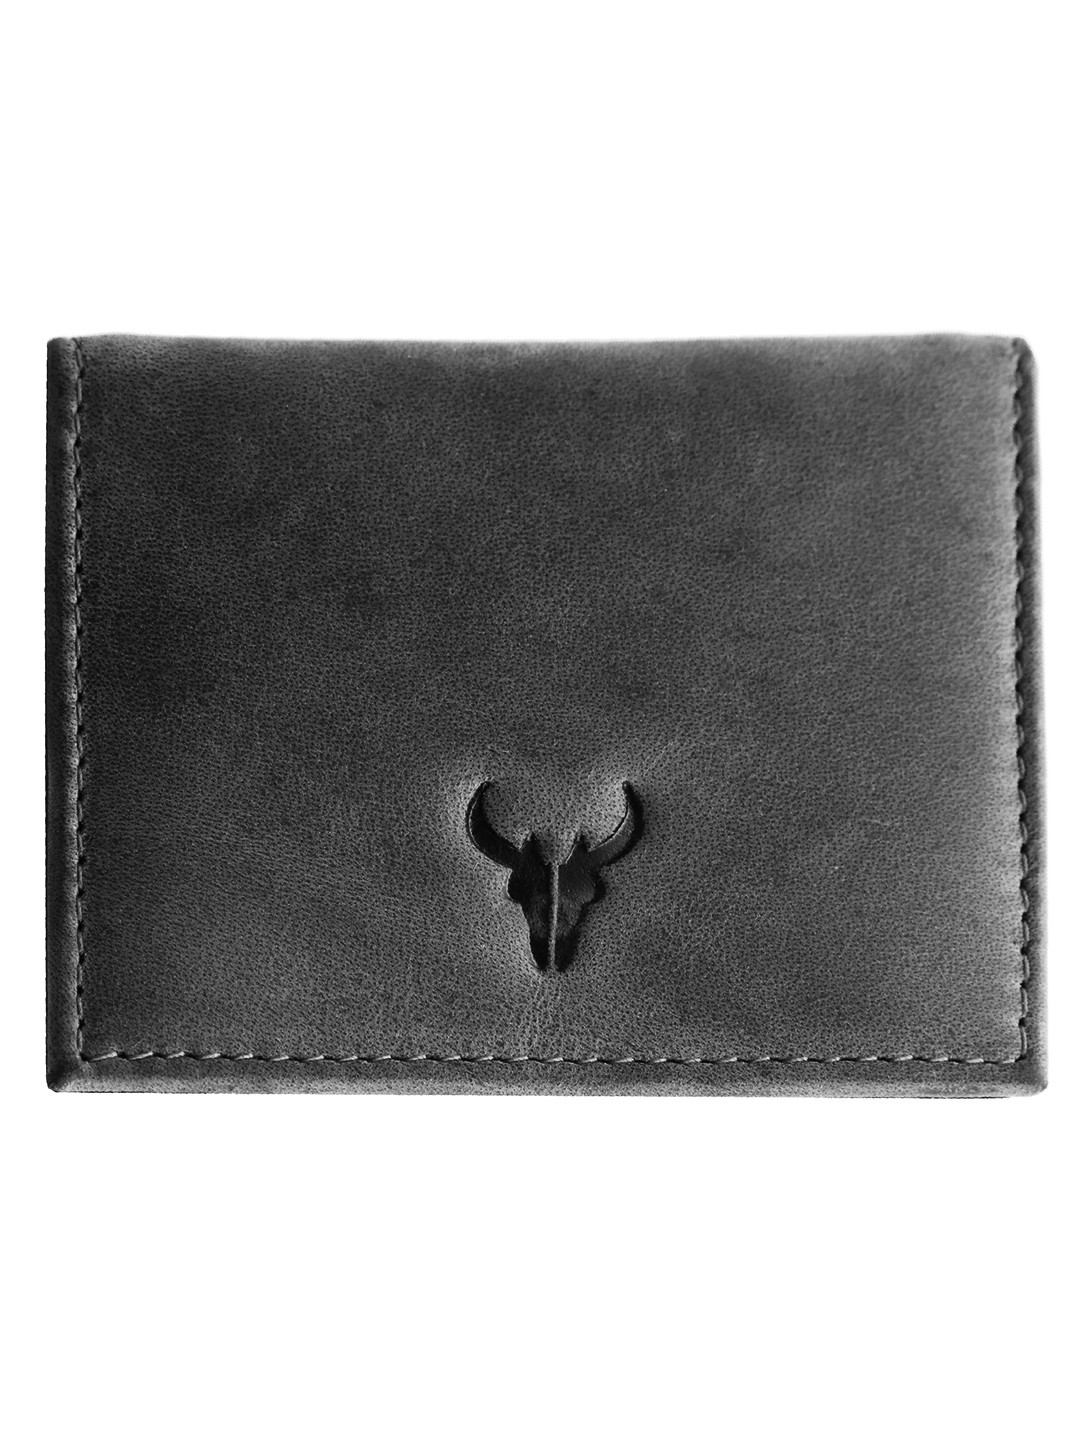 Napa Hide | Napa Hide RFID Protected Genuine High Quality Leather Grey Wallet for Men